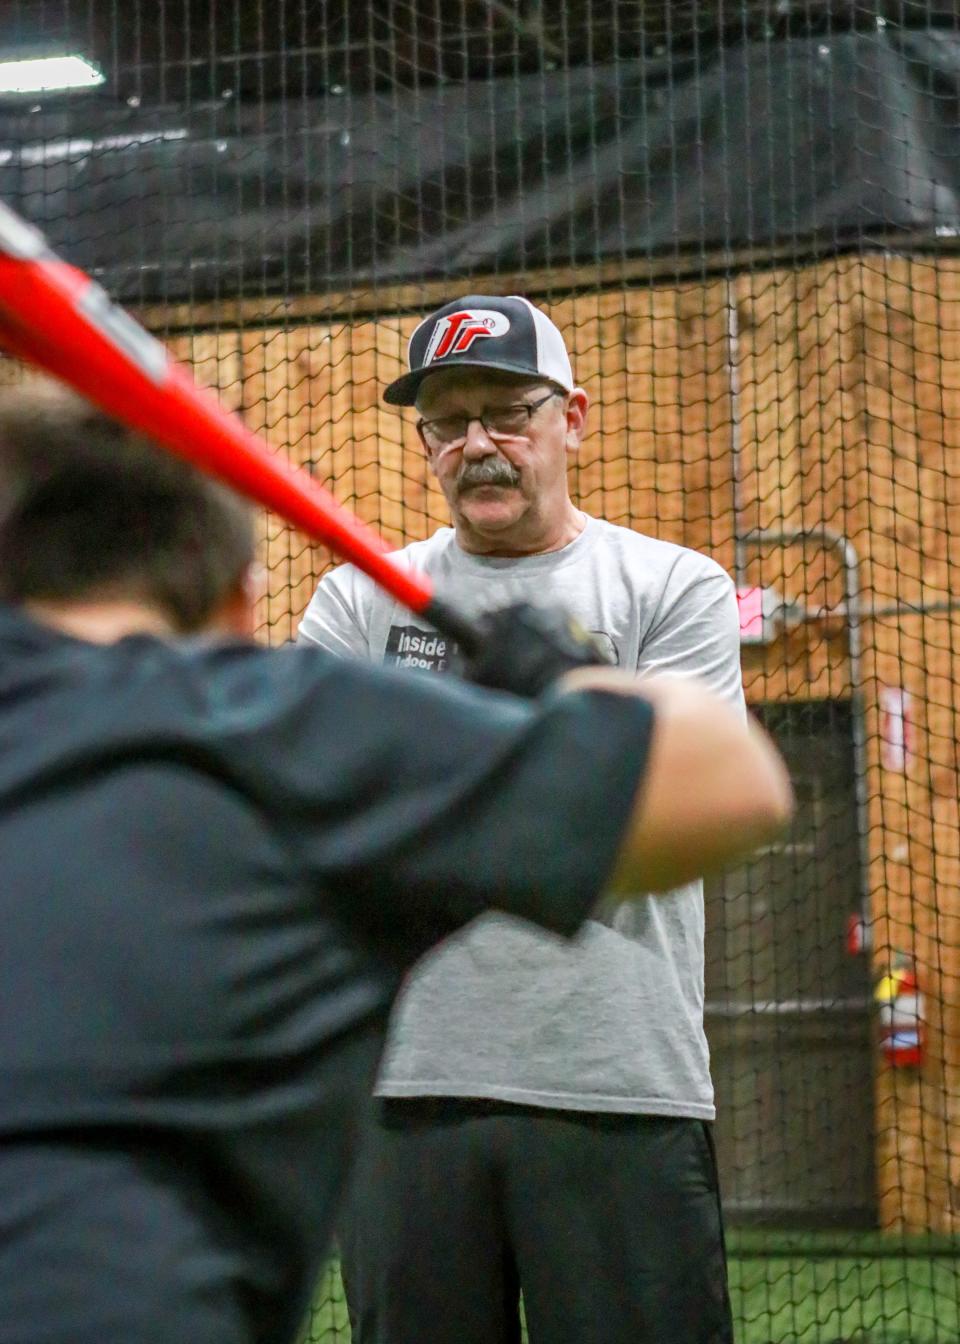 Jeff Antil studies the swing of Colton Linhares during his hitting session on Monday evening at Inside The Park Batting Cages.